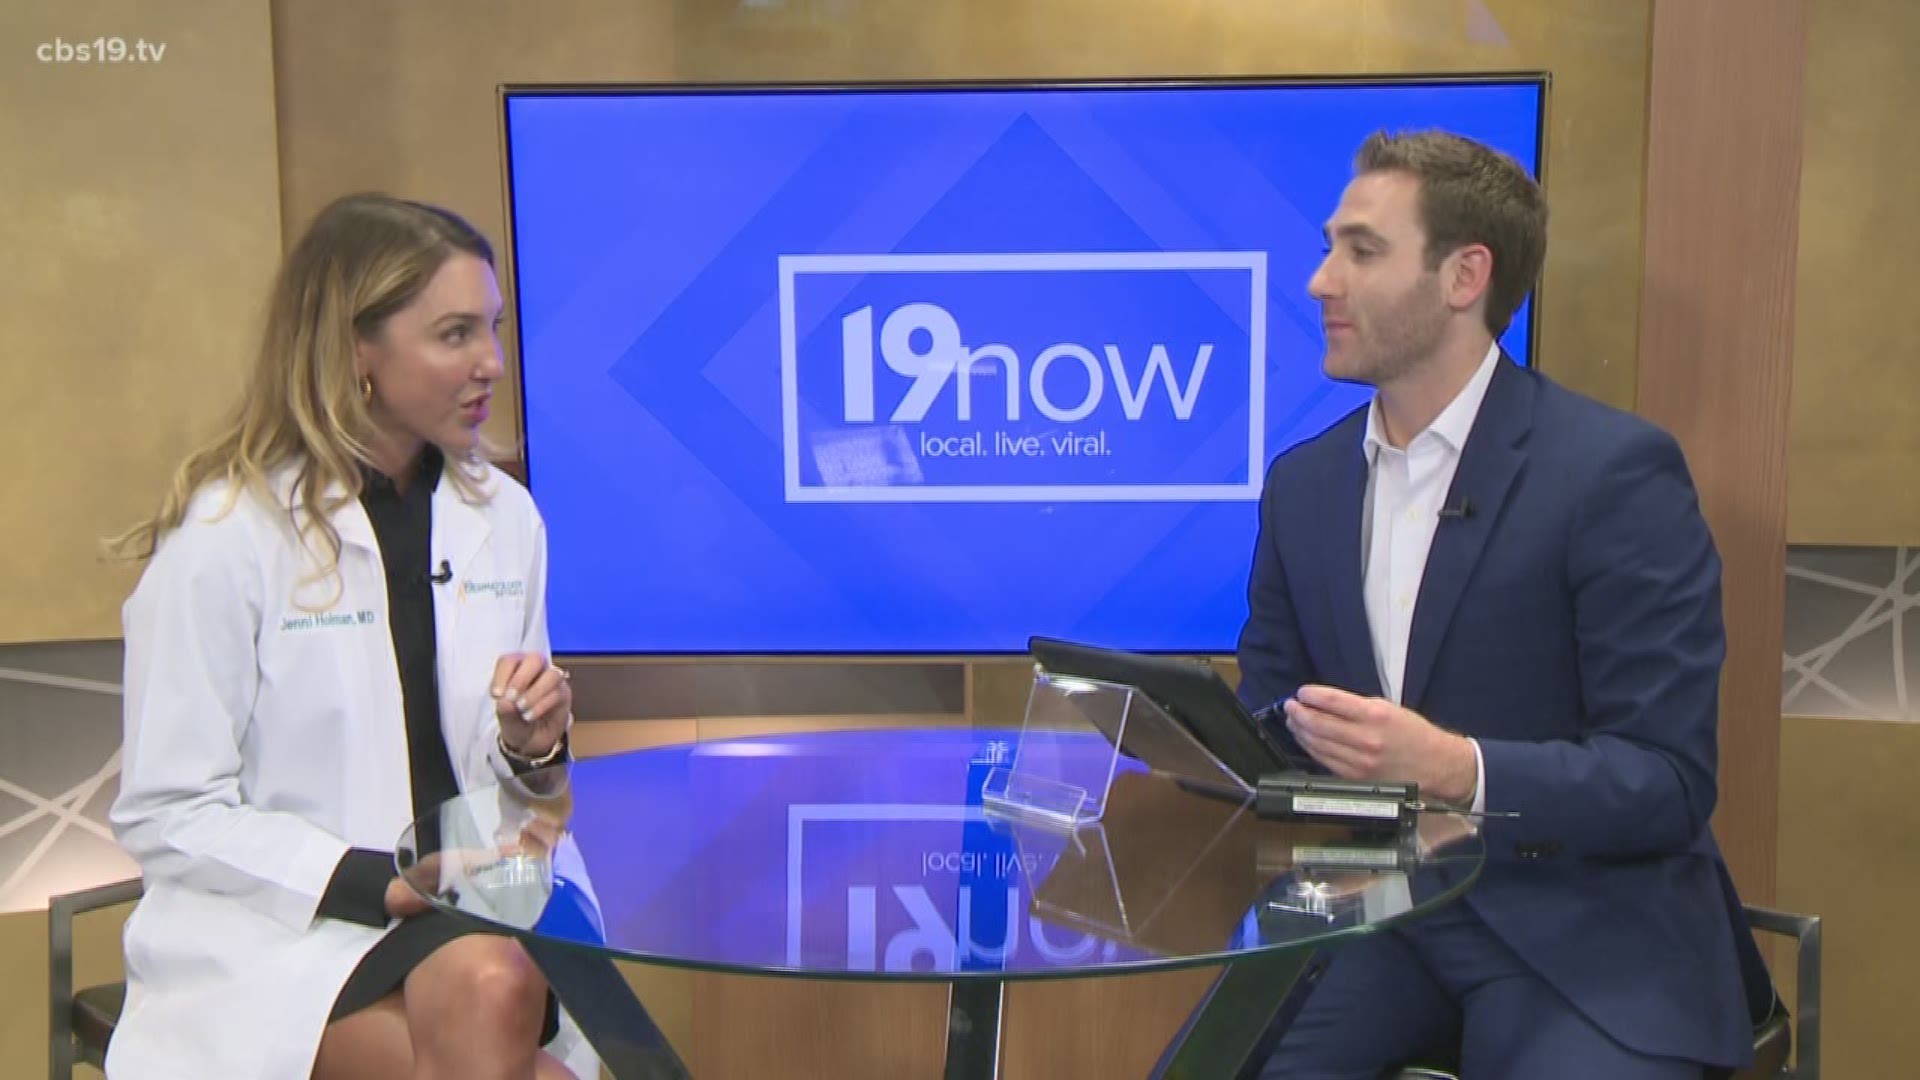 Are you sweating due to the hot temps? Dr. Jennifer Holman, a Board Certified Dermatologist, joins Mike on 19now to discuss solutions.